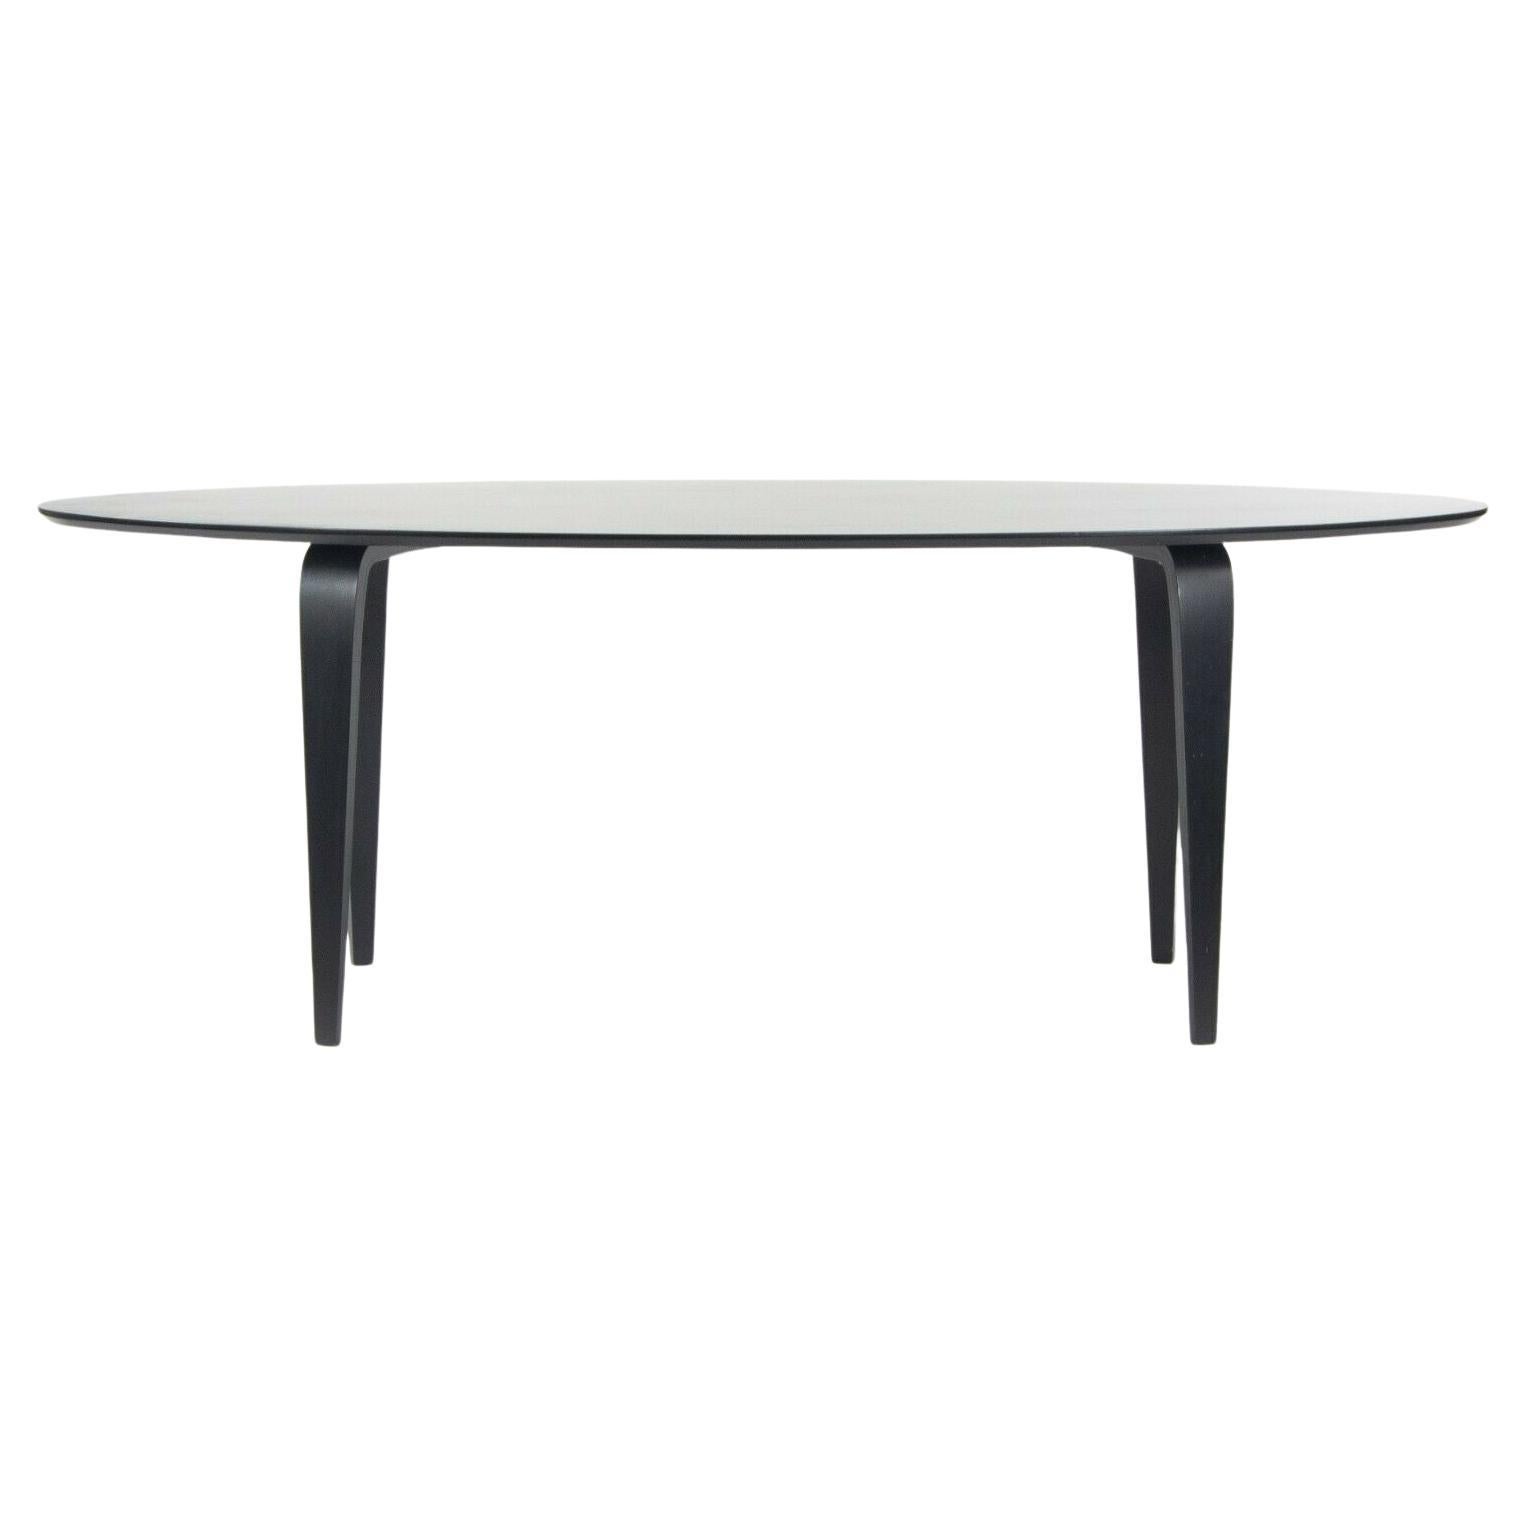 The Cherner Chair Company  Dining Room Tables